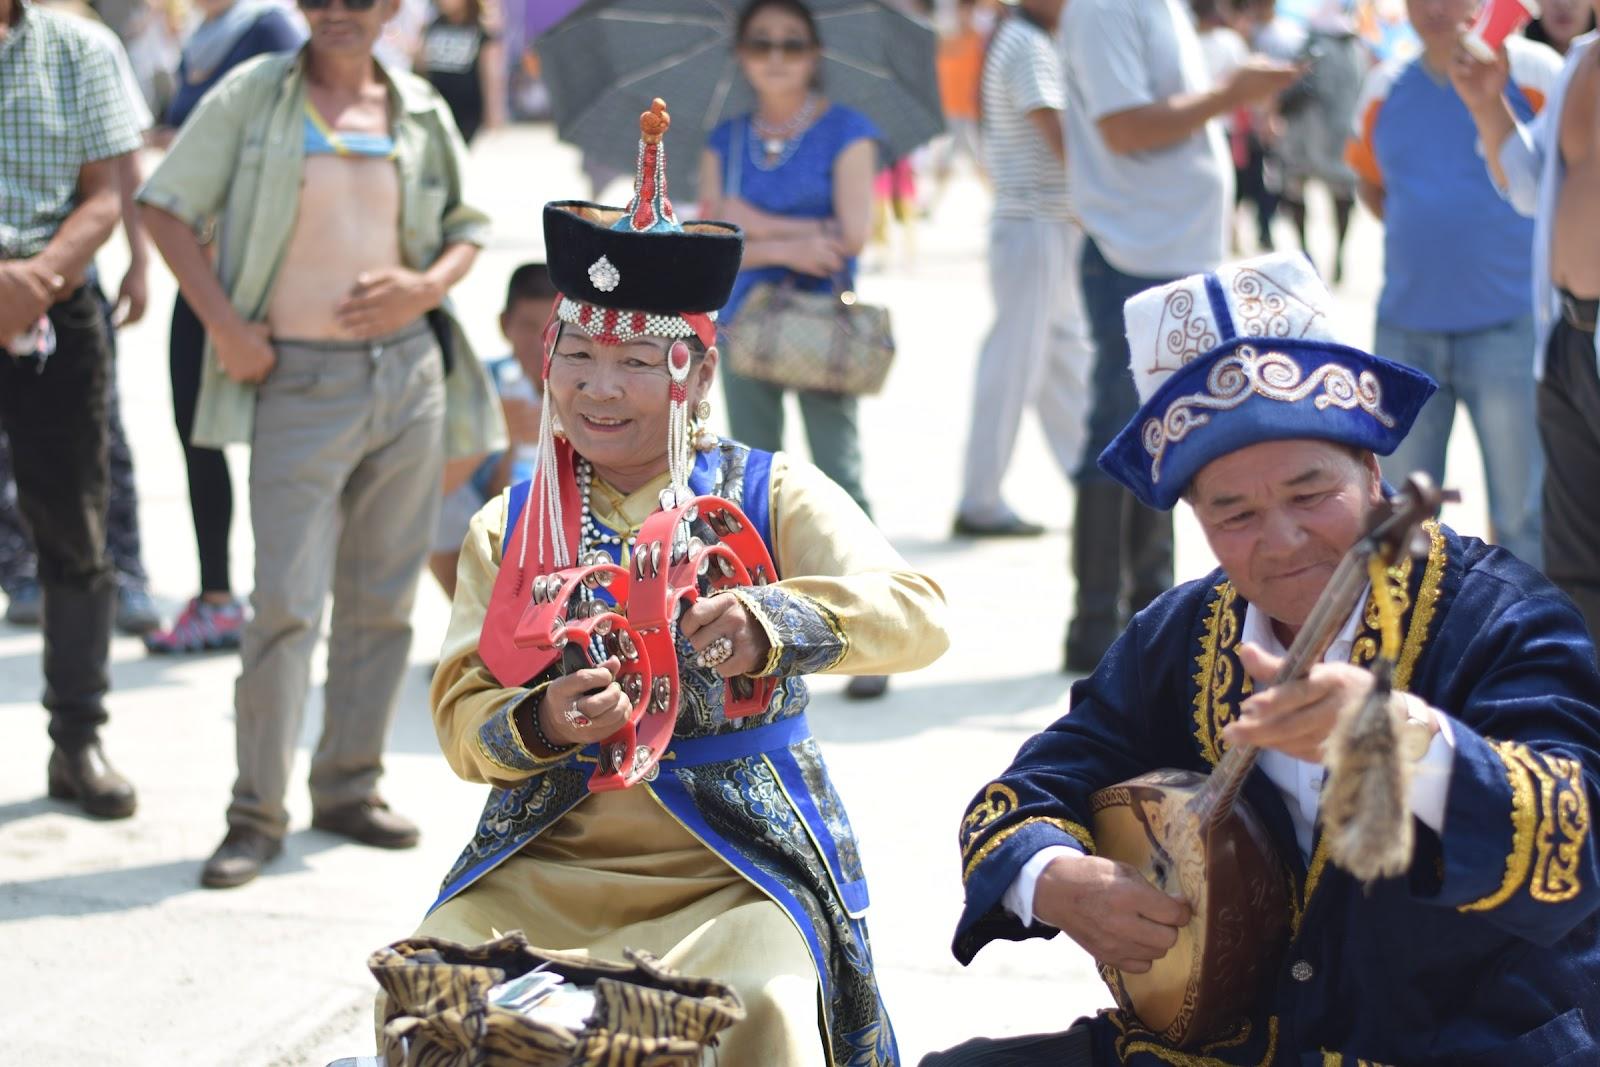 A group of Mongolian musicians play for locals in a market square.